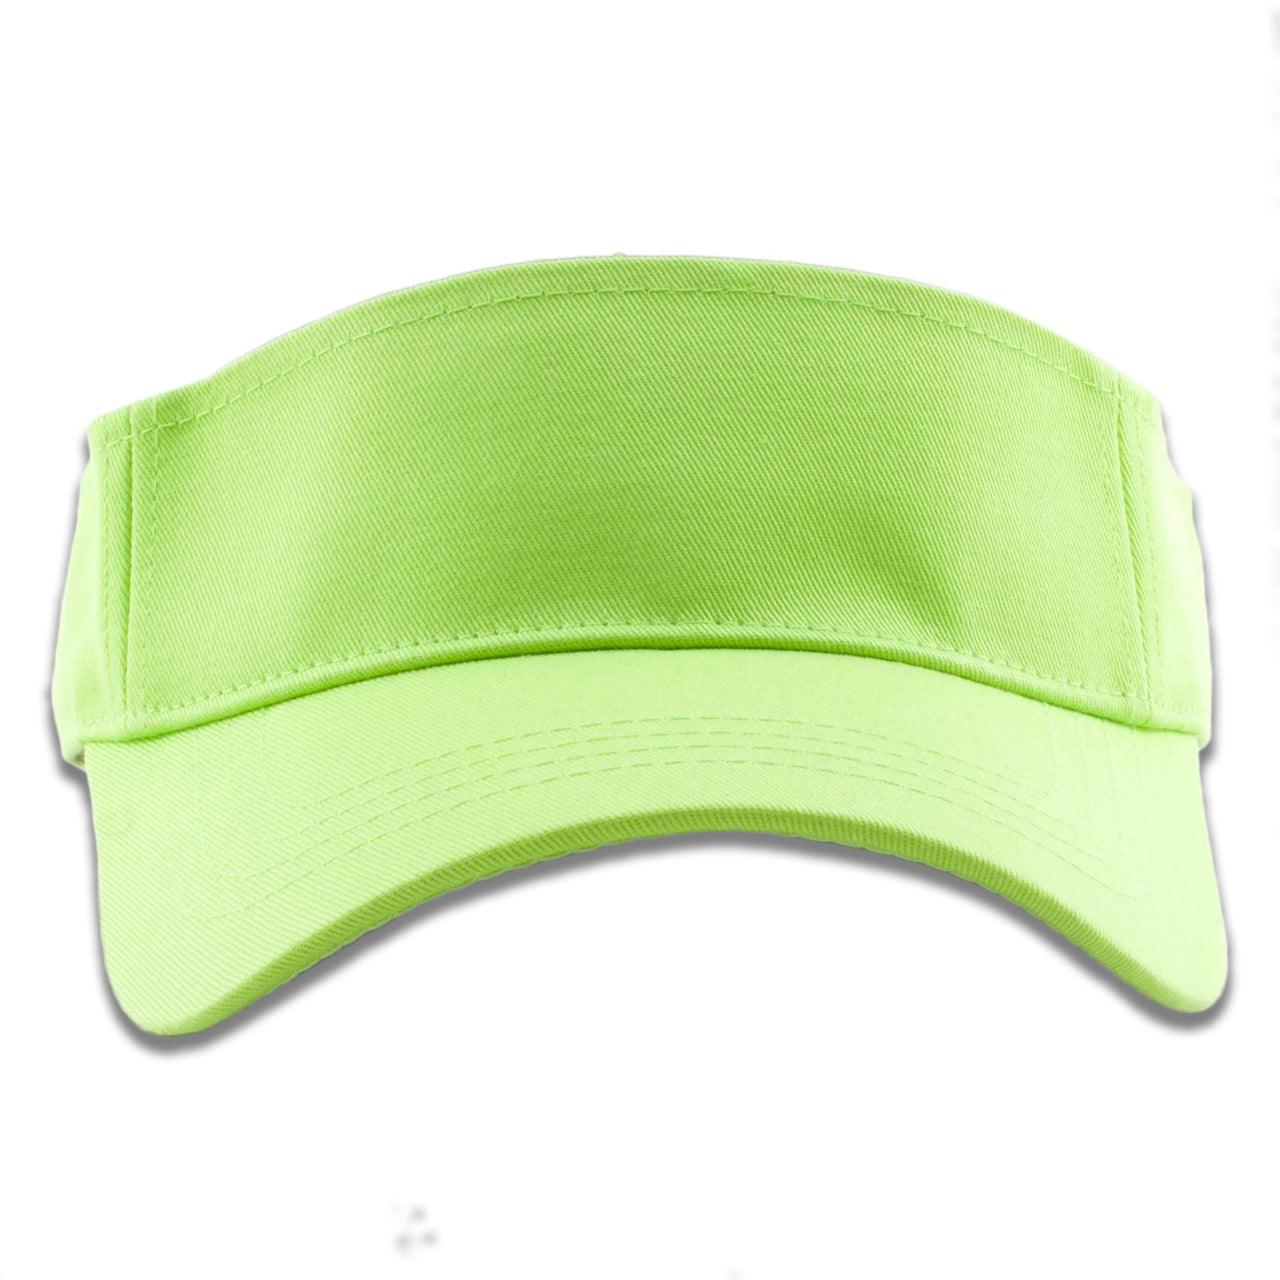 The lime green visor has a bent brim with a mid-level front panel